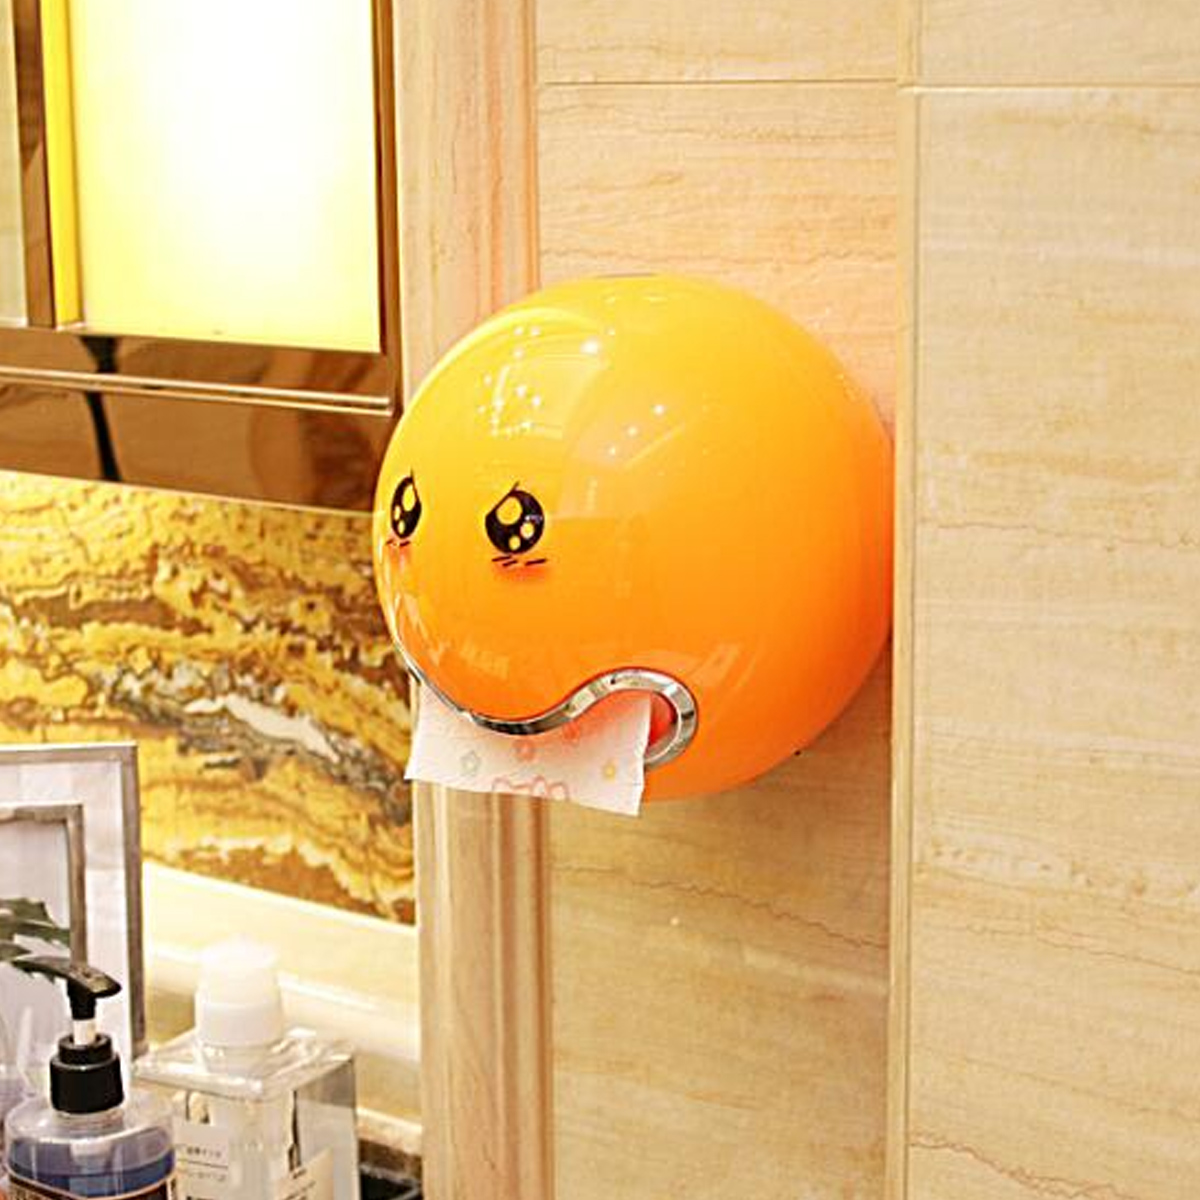 Bathroom-Ball-Shaped-Face-Wall-Mounted-Tissue-Holder-Toilet-Roll-Paper-Box-Paper-Shelf-Holder-1634911-4